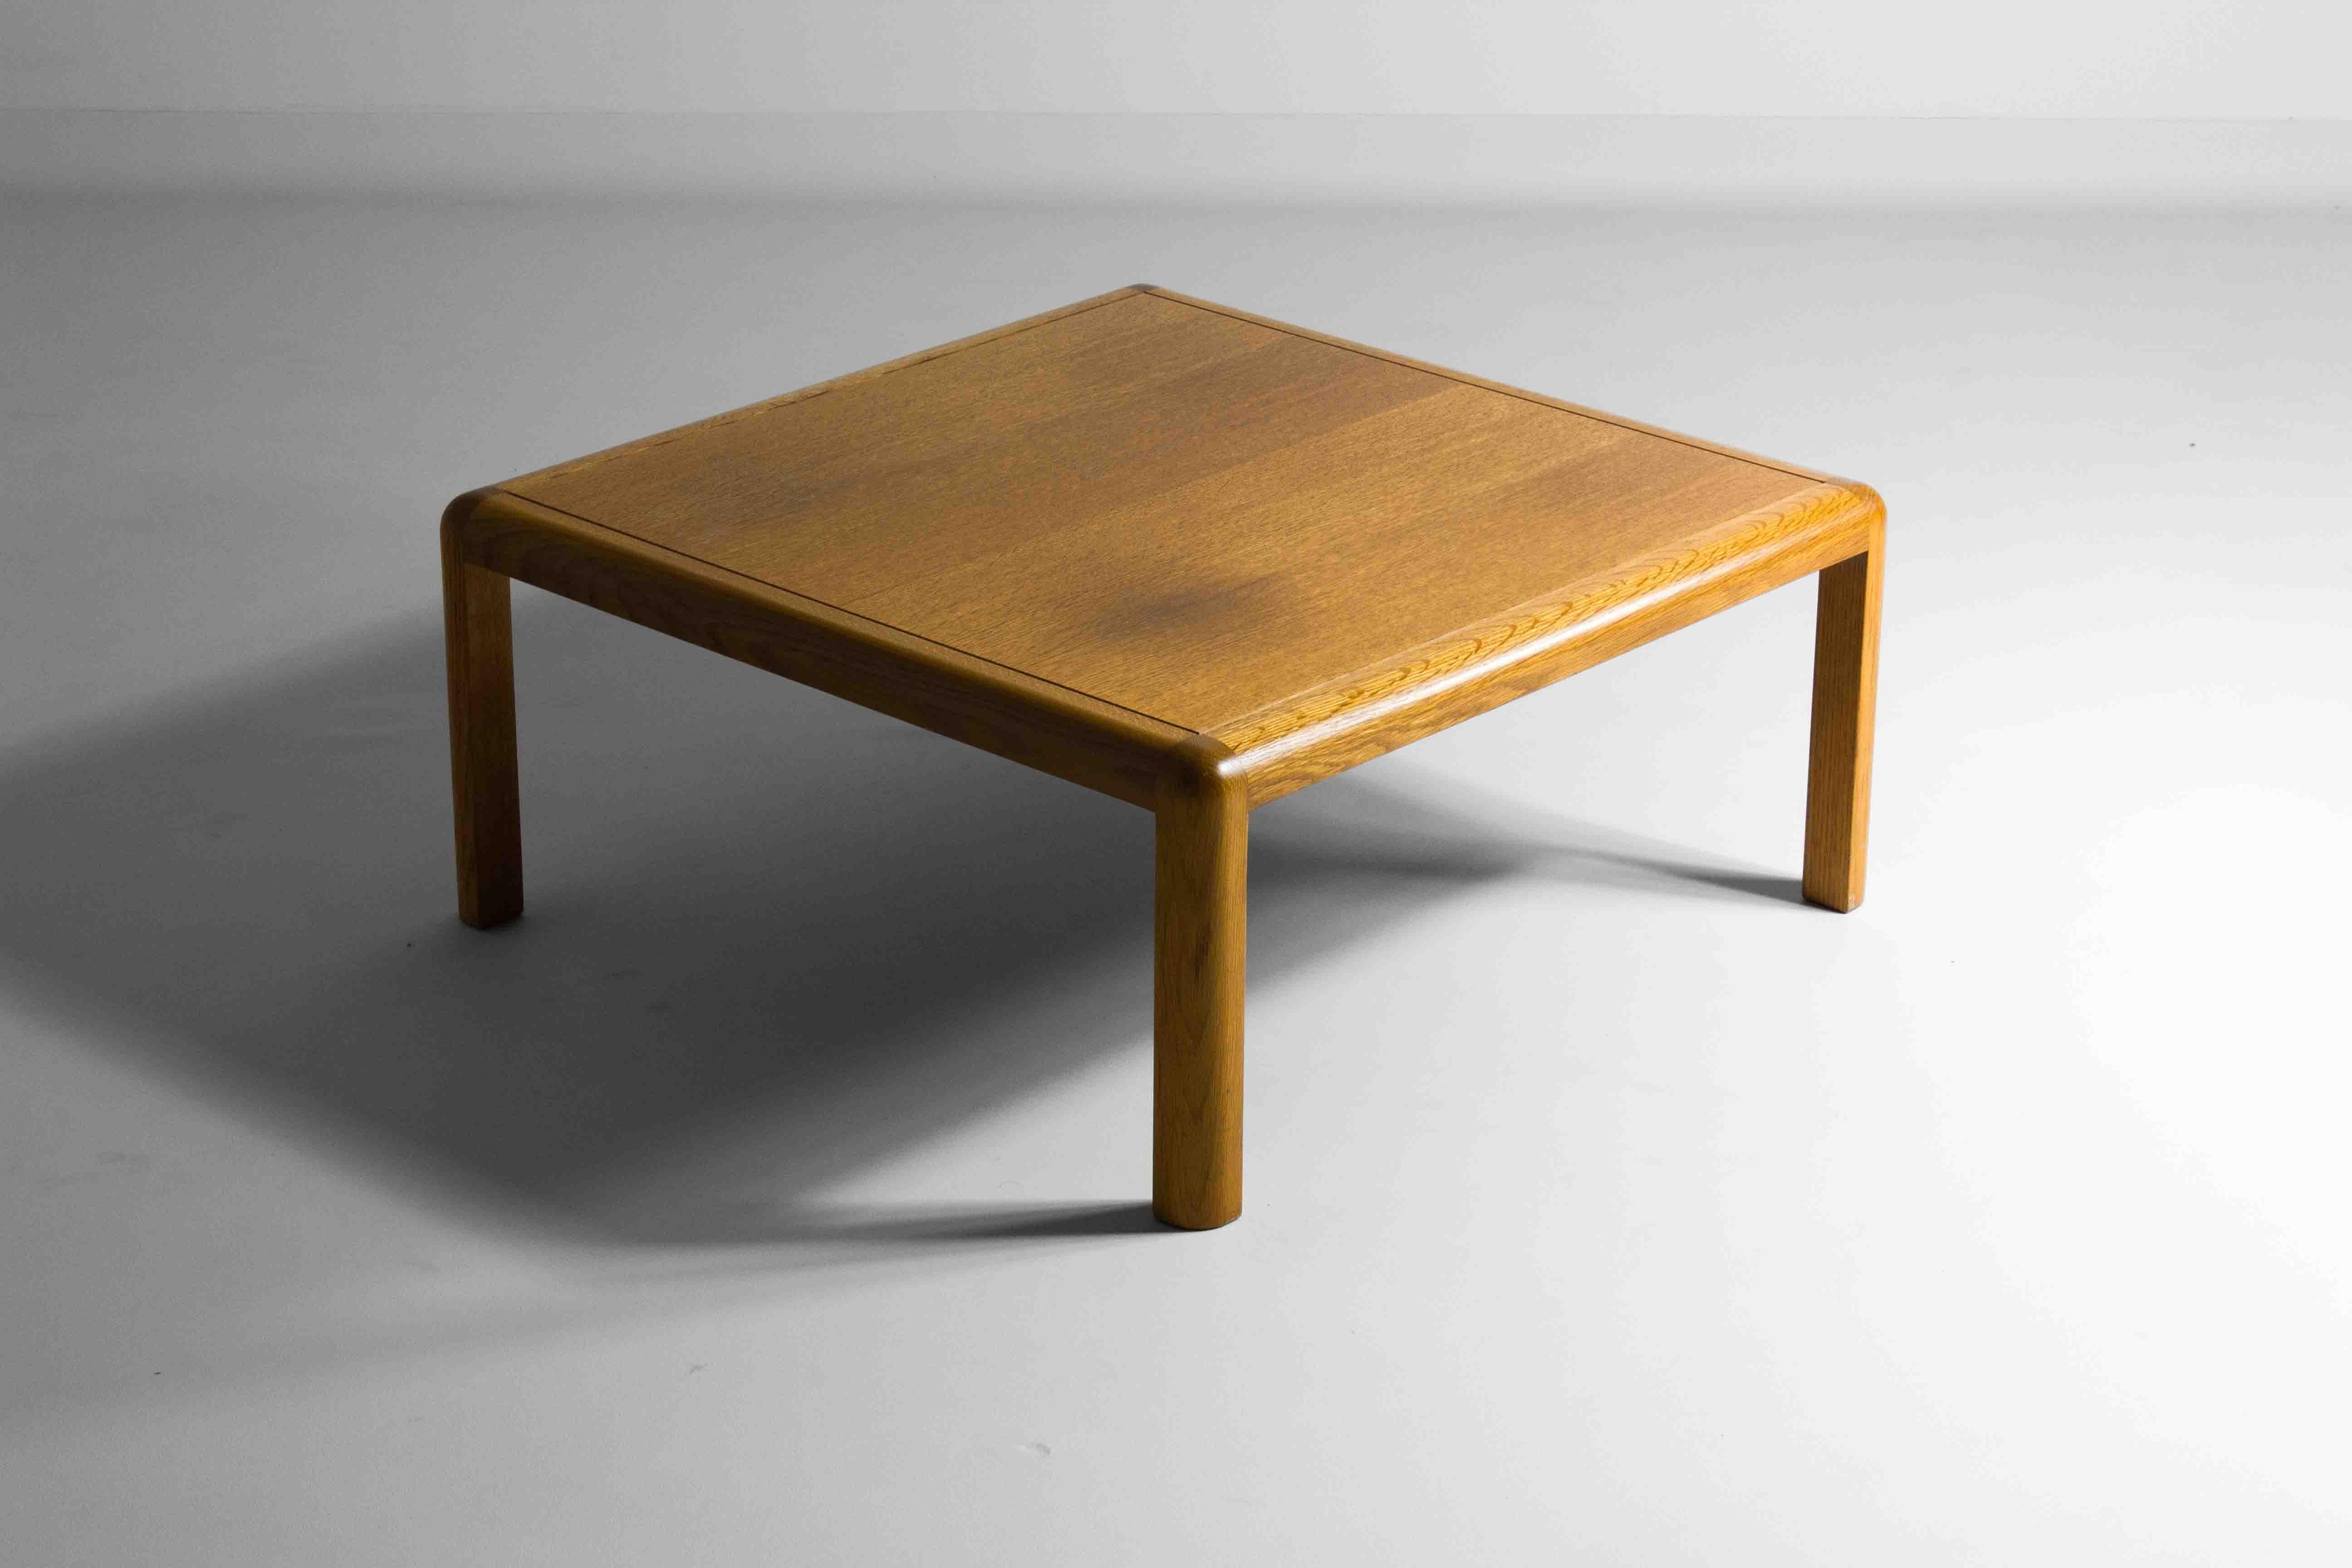 This minimalist square coffee table with rounded corners was made by Van den Berghe – Pauvers in the 1970s in Belgium. The warm premium oak goes together very well with the sleek forms of the table.